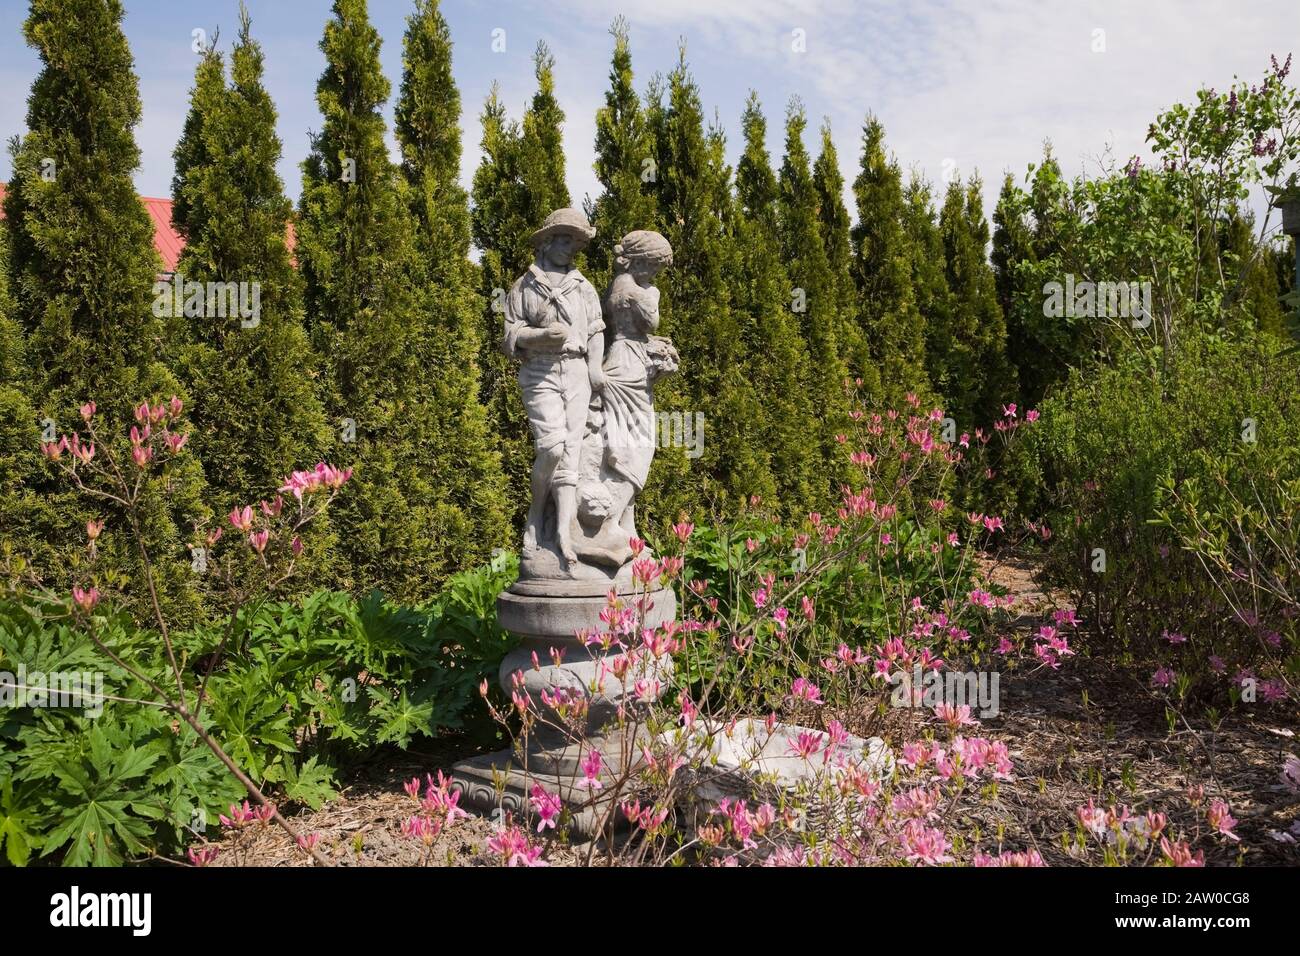 Concrete statue of a young boy and girl, Azalea - Rhododendron 'Northern Lights' bordered by a row of Thuja occidentalis 'Smaragd' - Cedar trees Stock Photo